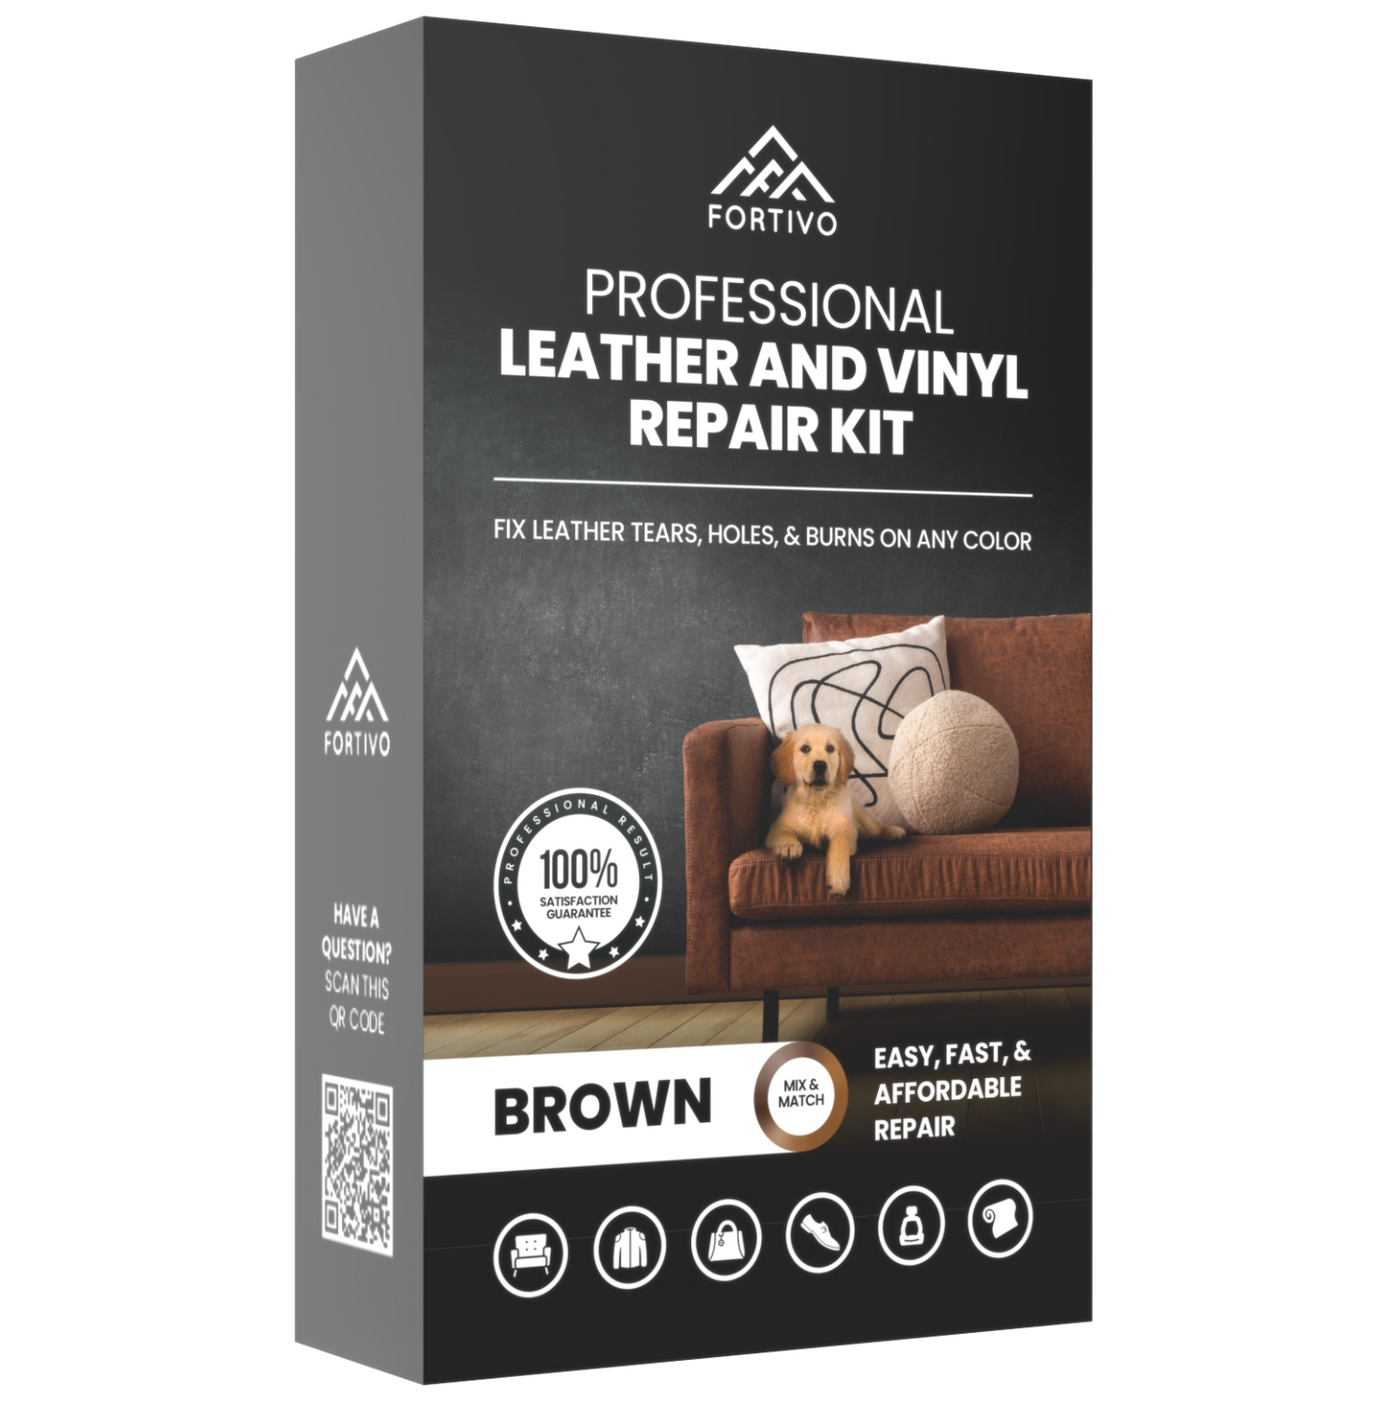 Brown Leather Leather Repair Kit for Furniture, Leather Dye for Sofa, Vinyl  Repa